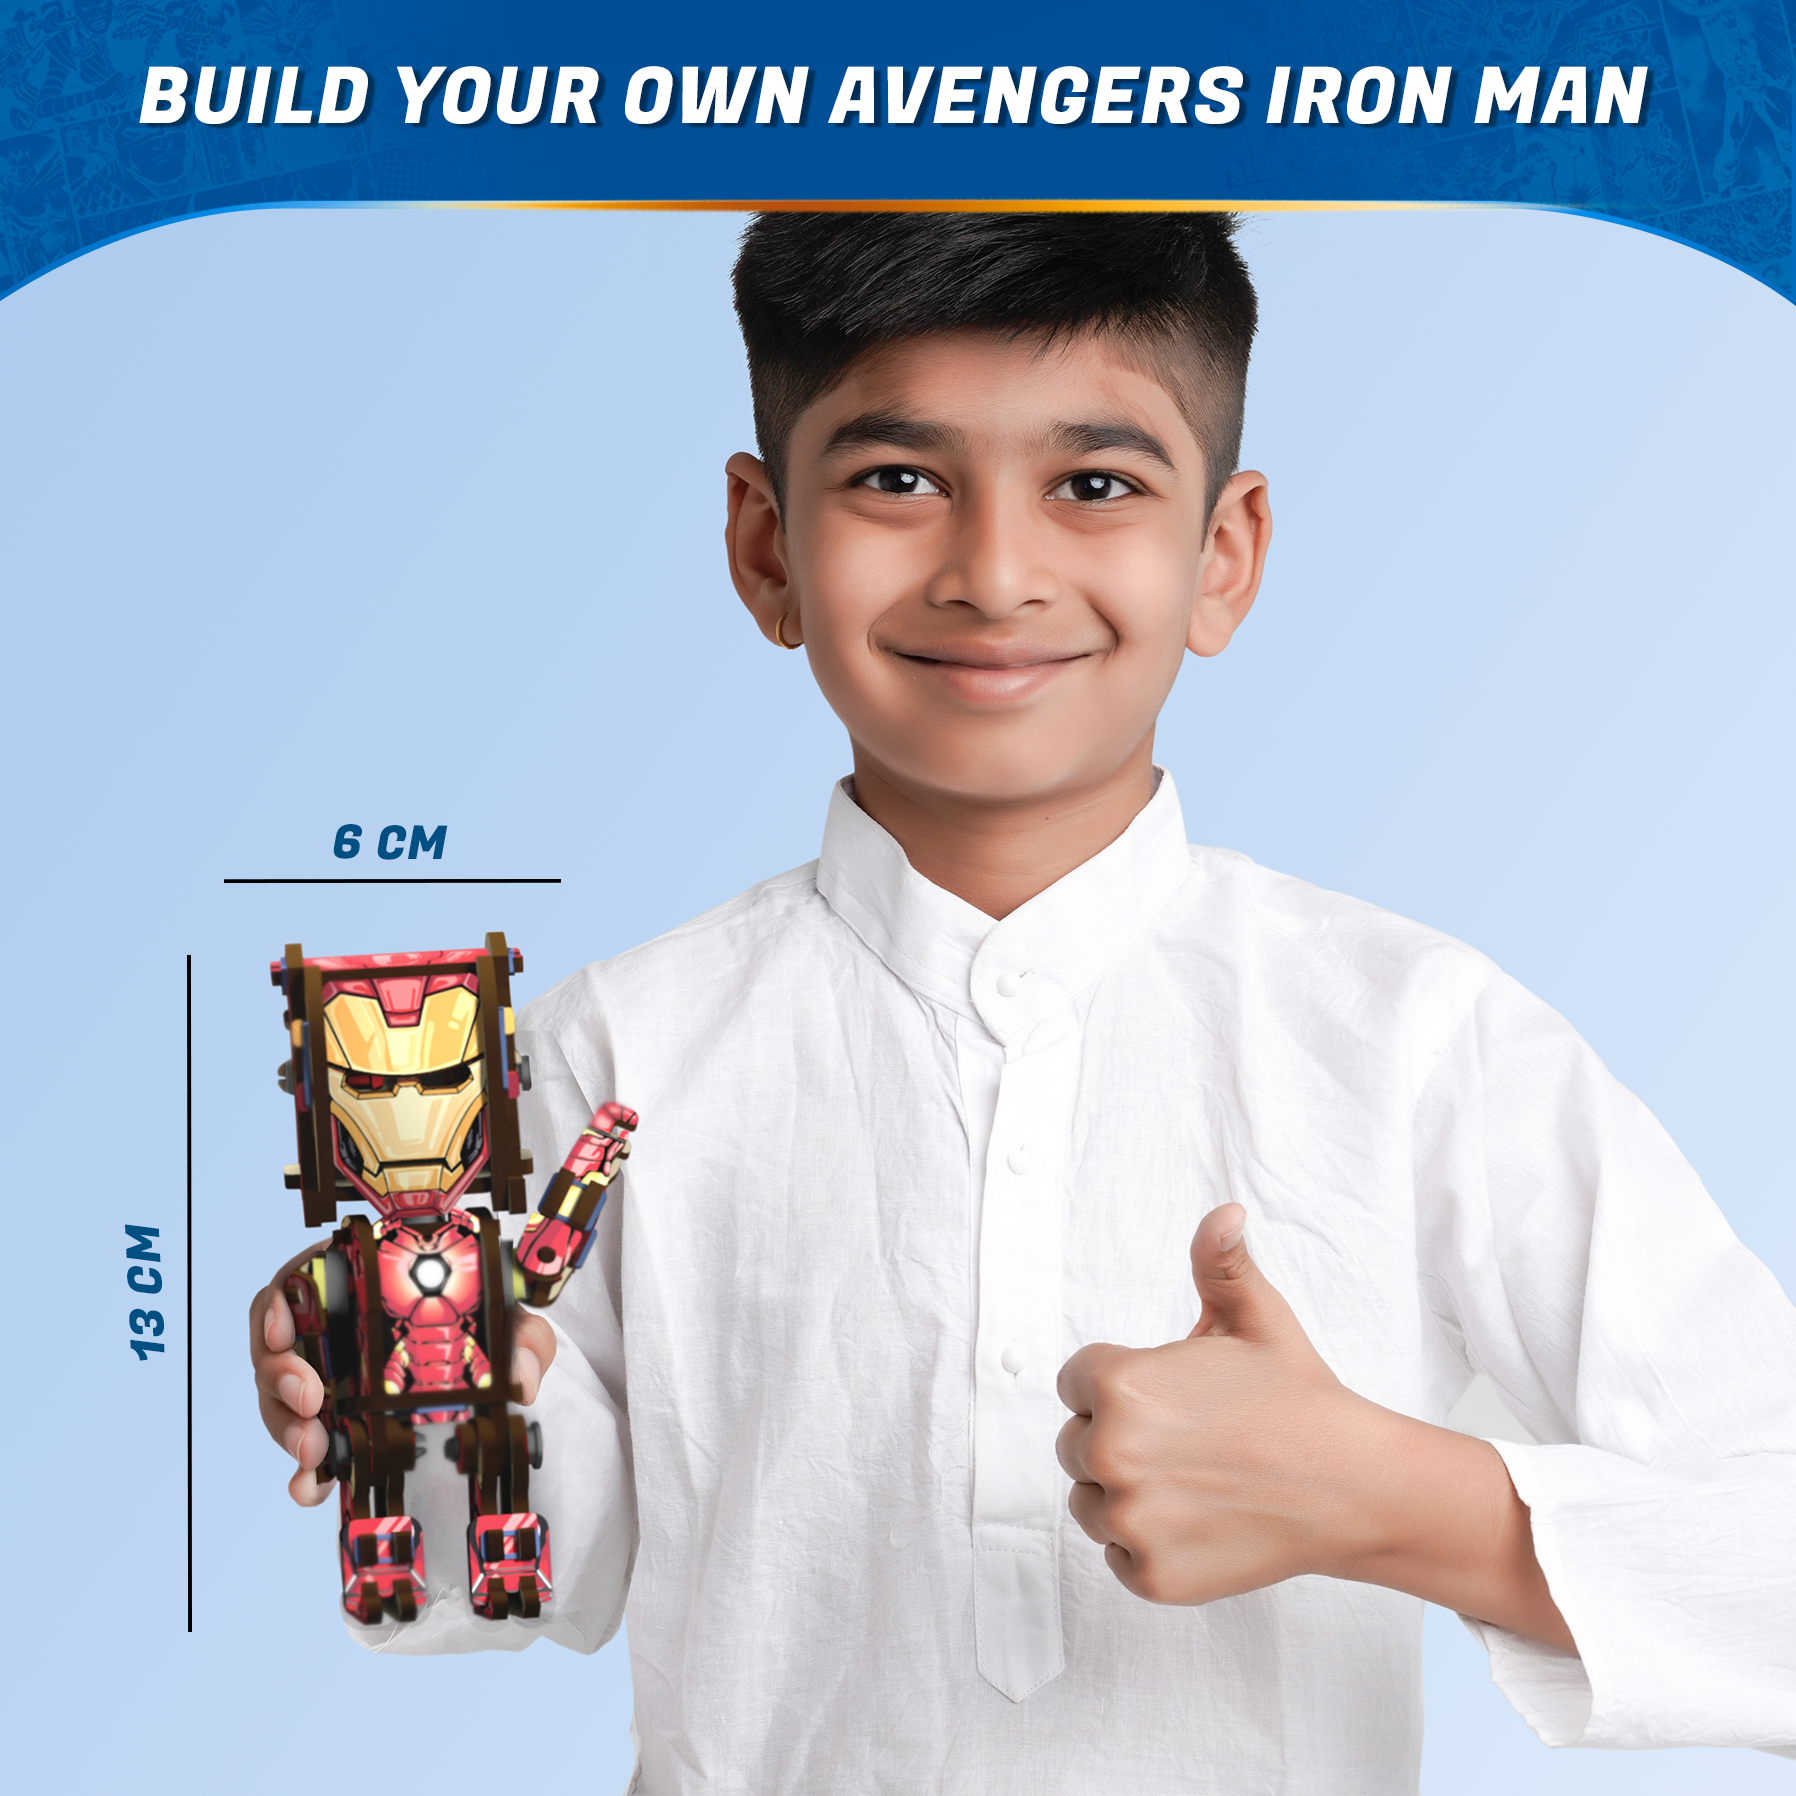 Buildables Marvel Iron Man